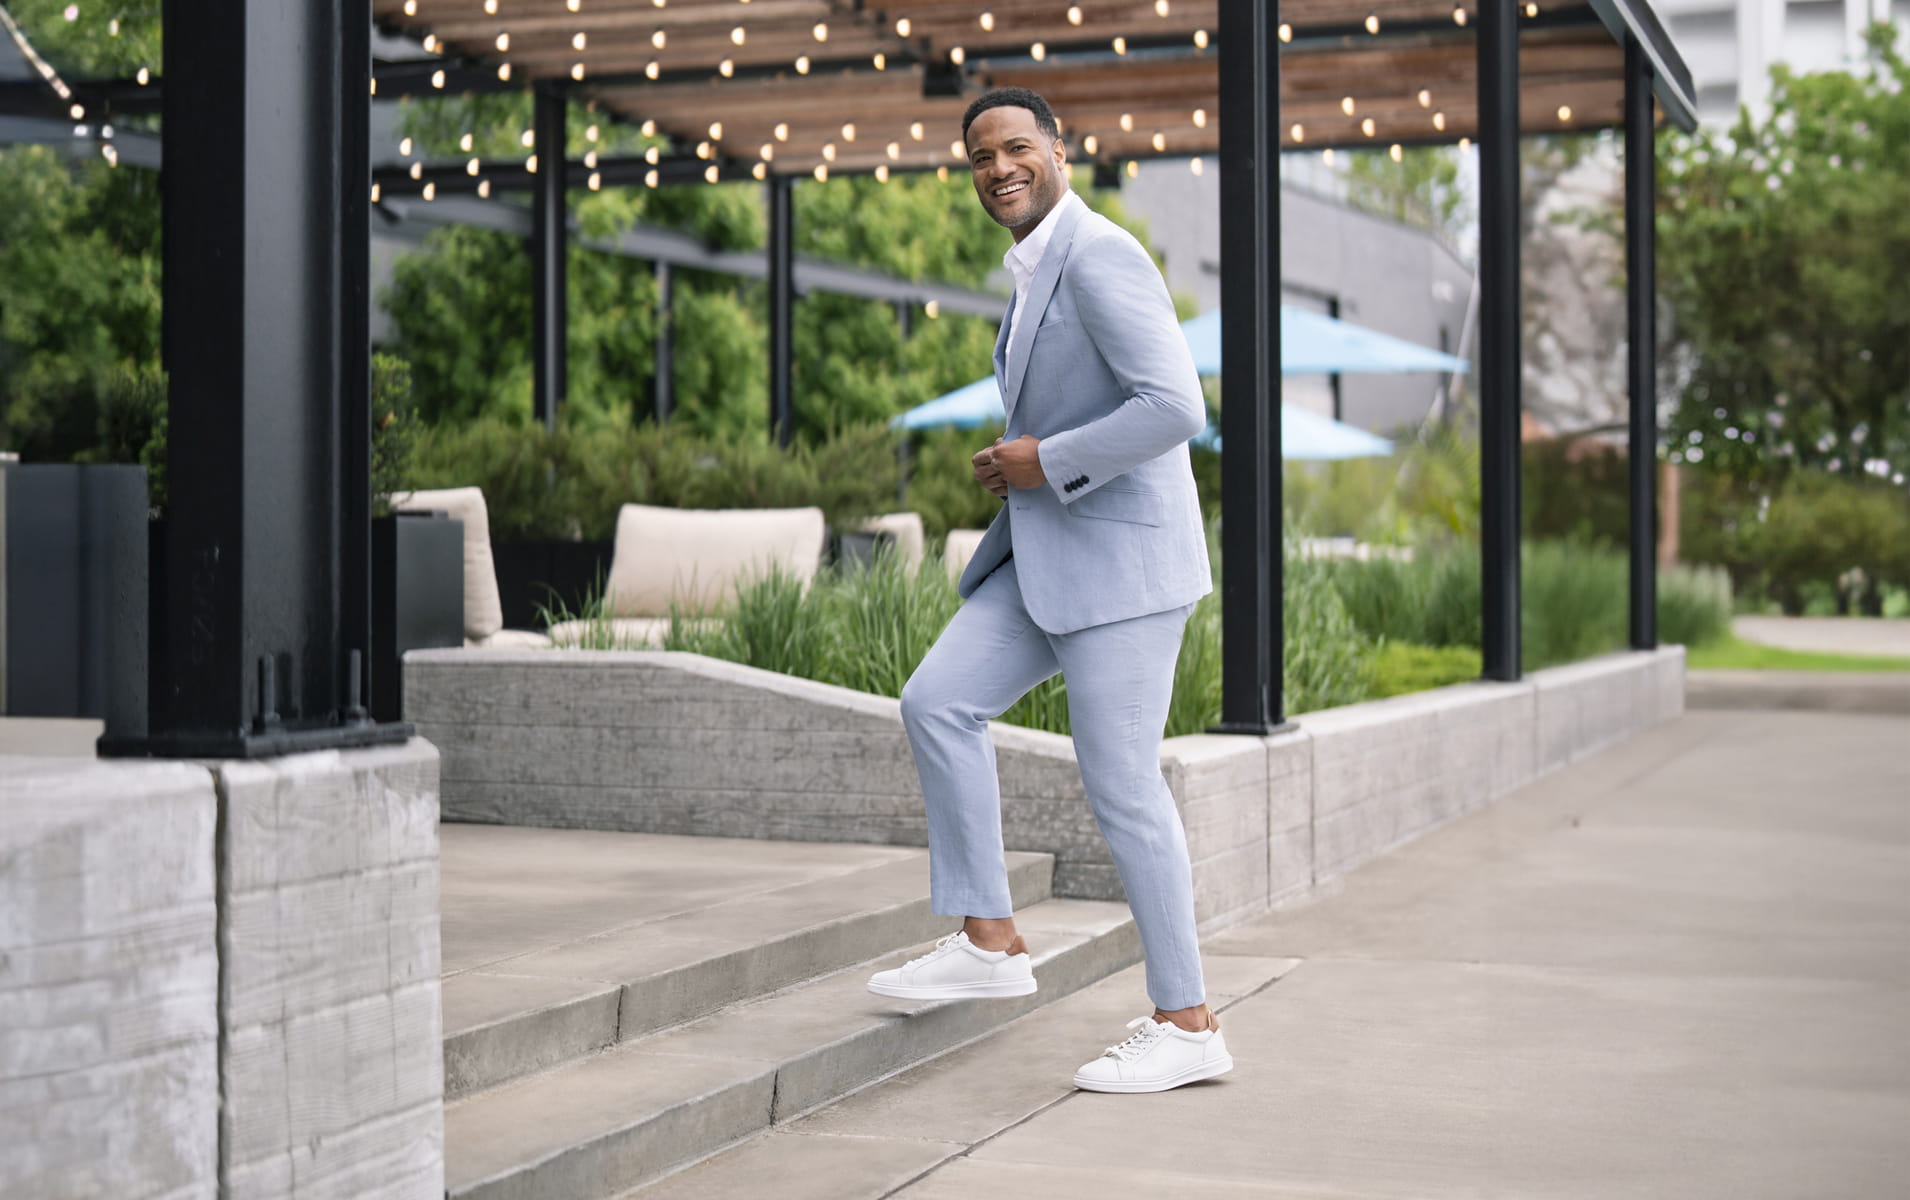 Florsheim casuals featuring the Social sneaker in white on a man in a grey suit. 